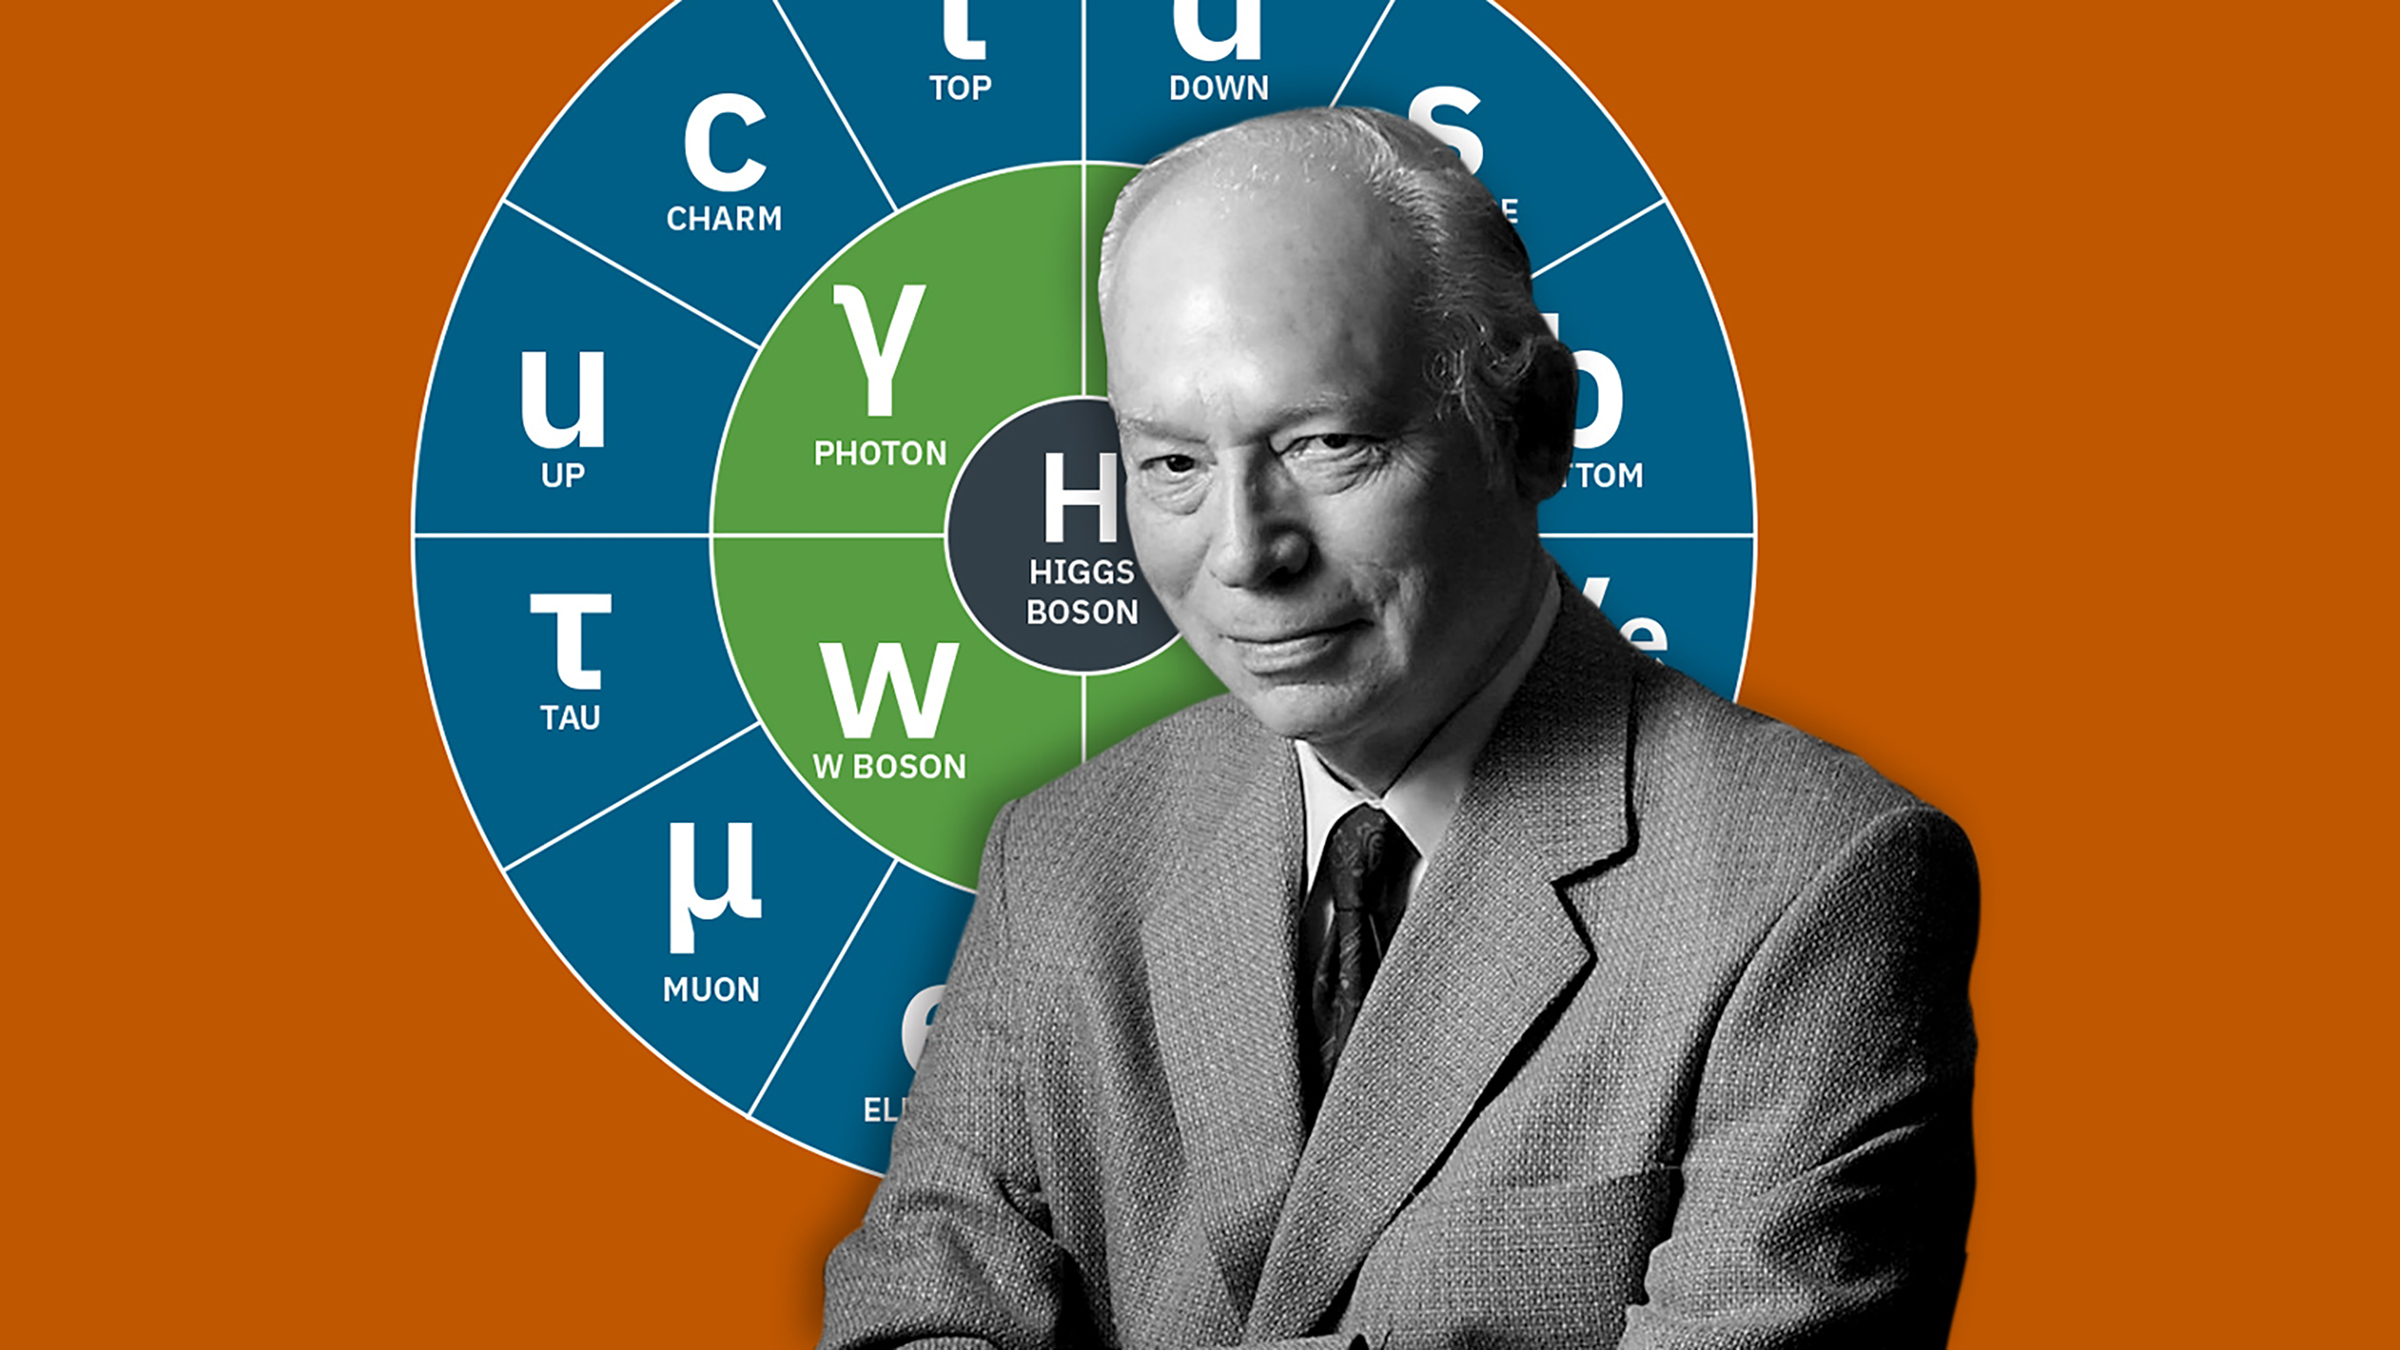 Portrait of a man in a suit with arms crossed in front of an illustration of the Standard Model of Physics